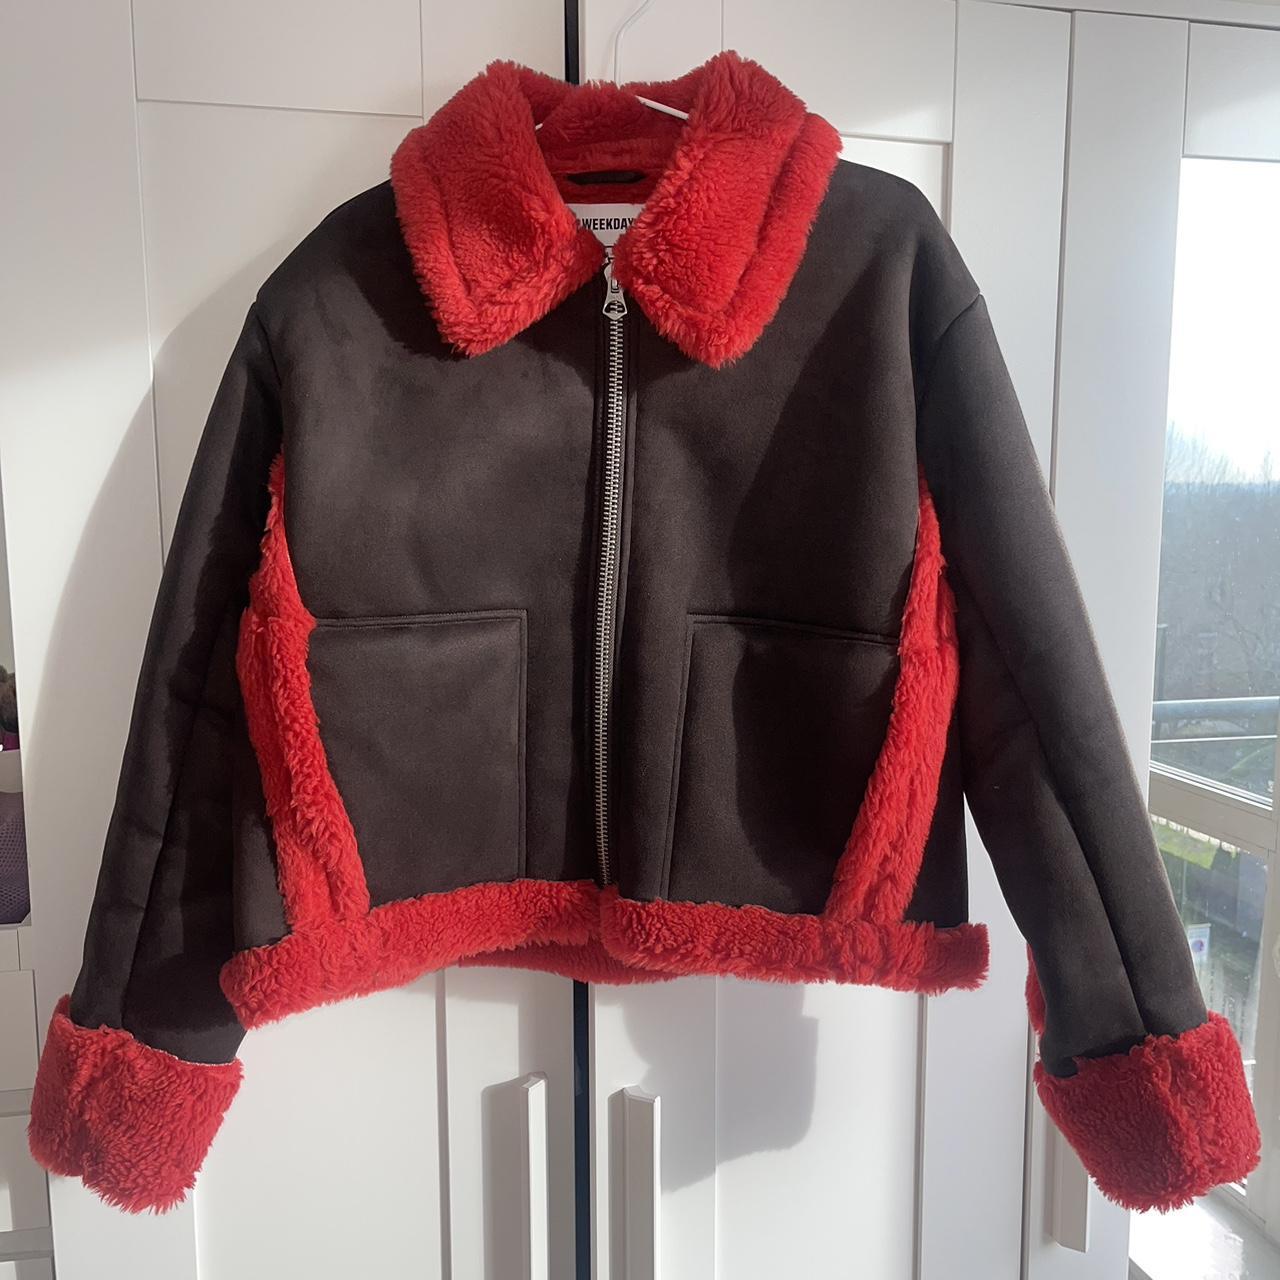 Weekday Enzo Shearling Jacket , Colour: Brown/red...